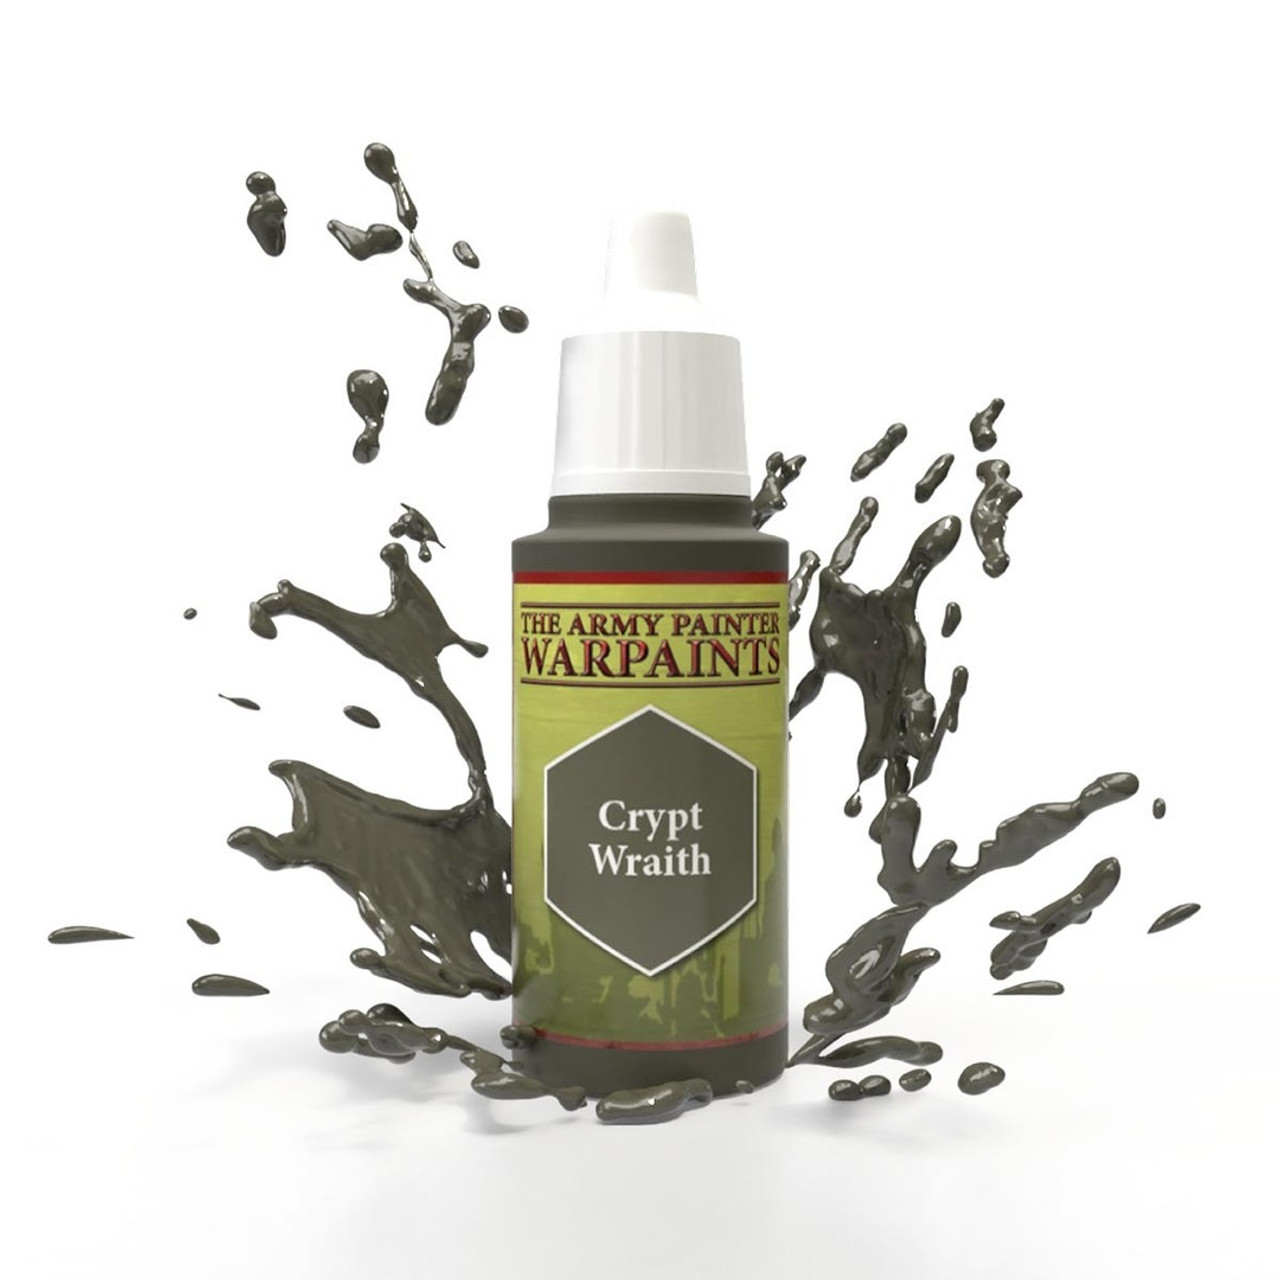 ARMWP1413 Crypt Wraith - Acrylic Paint for Miniatures in 18 ml Dropper Bottle